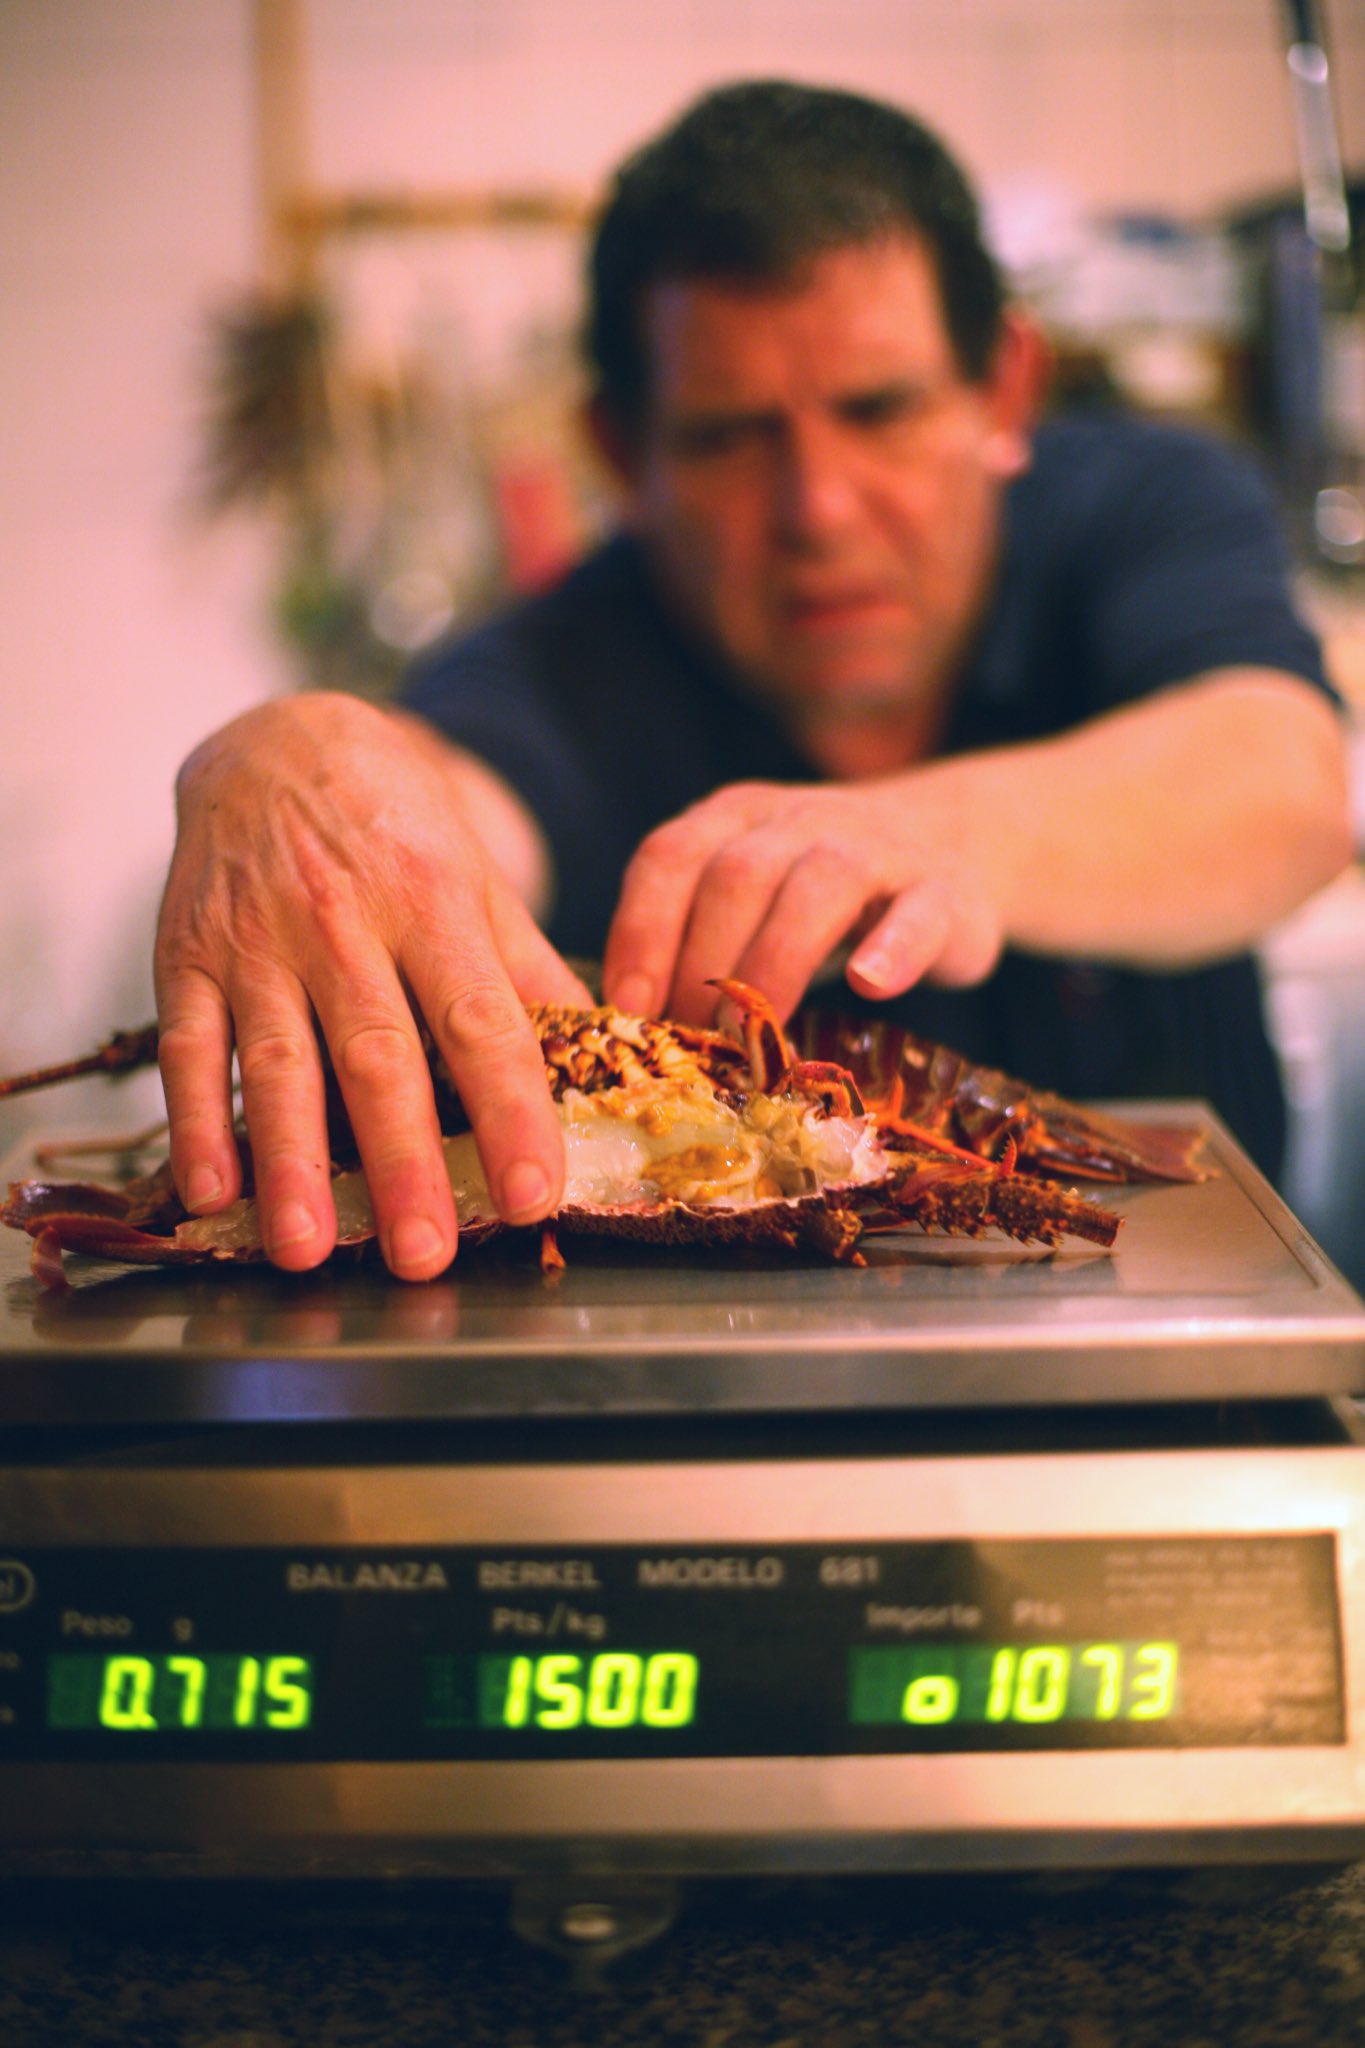 A fishmonger weighing seafood in Spain